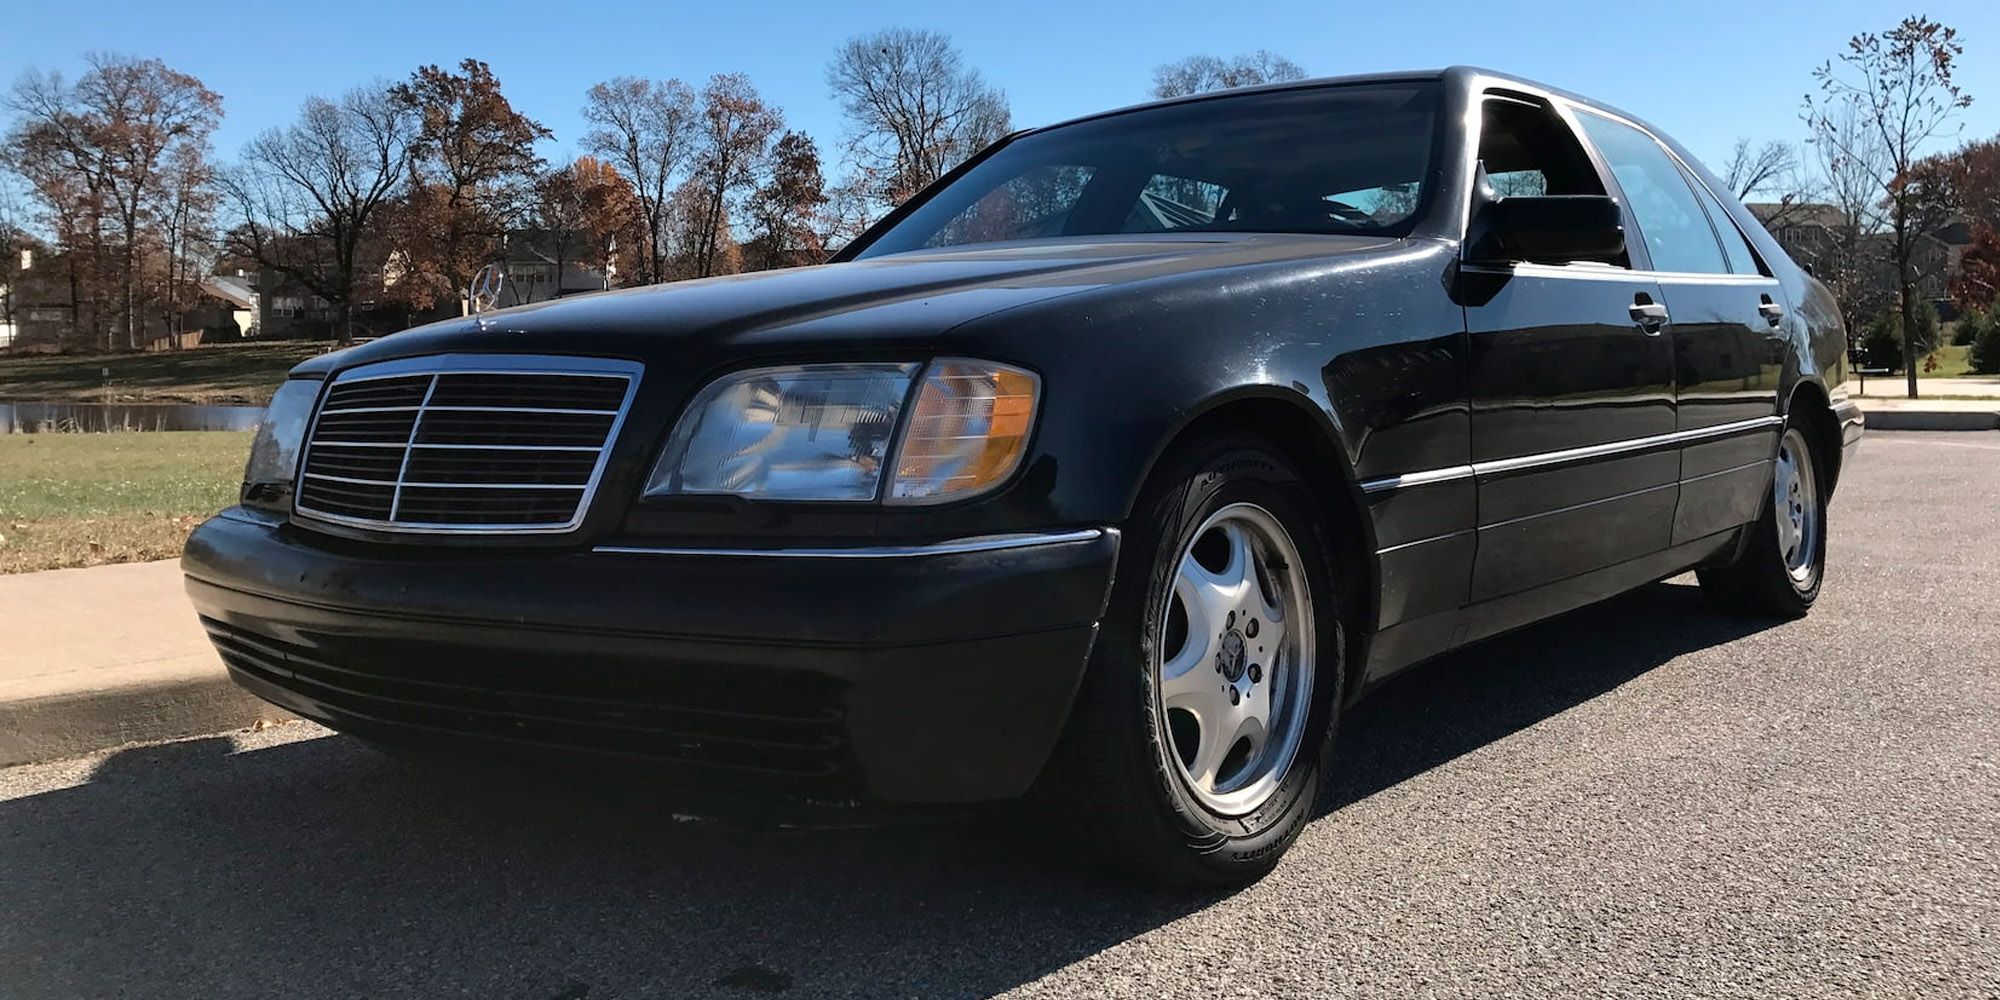 The front of the W140 S500